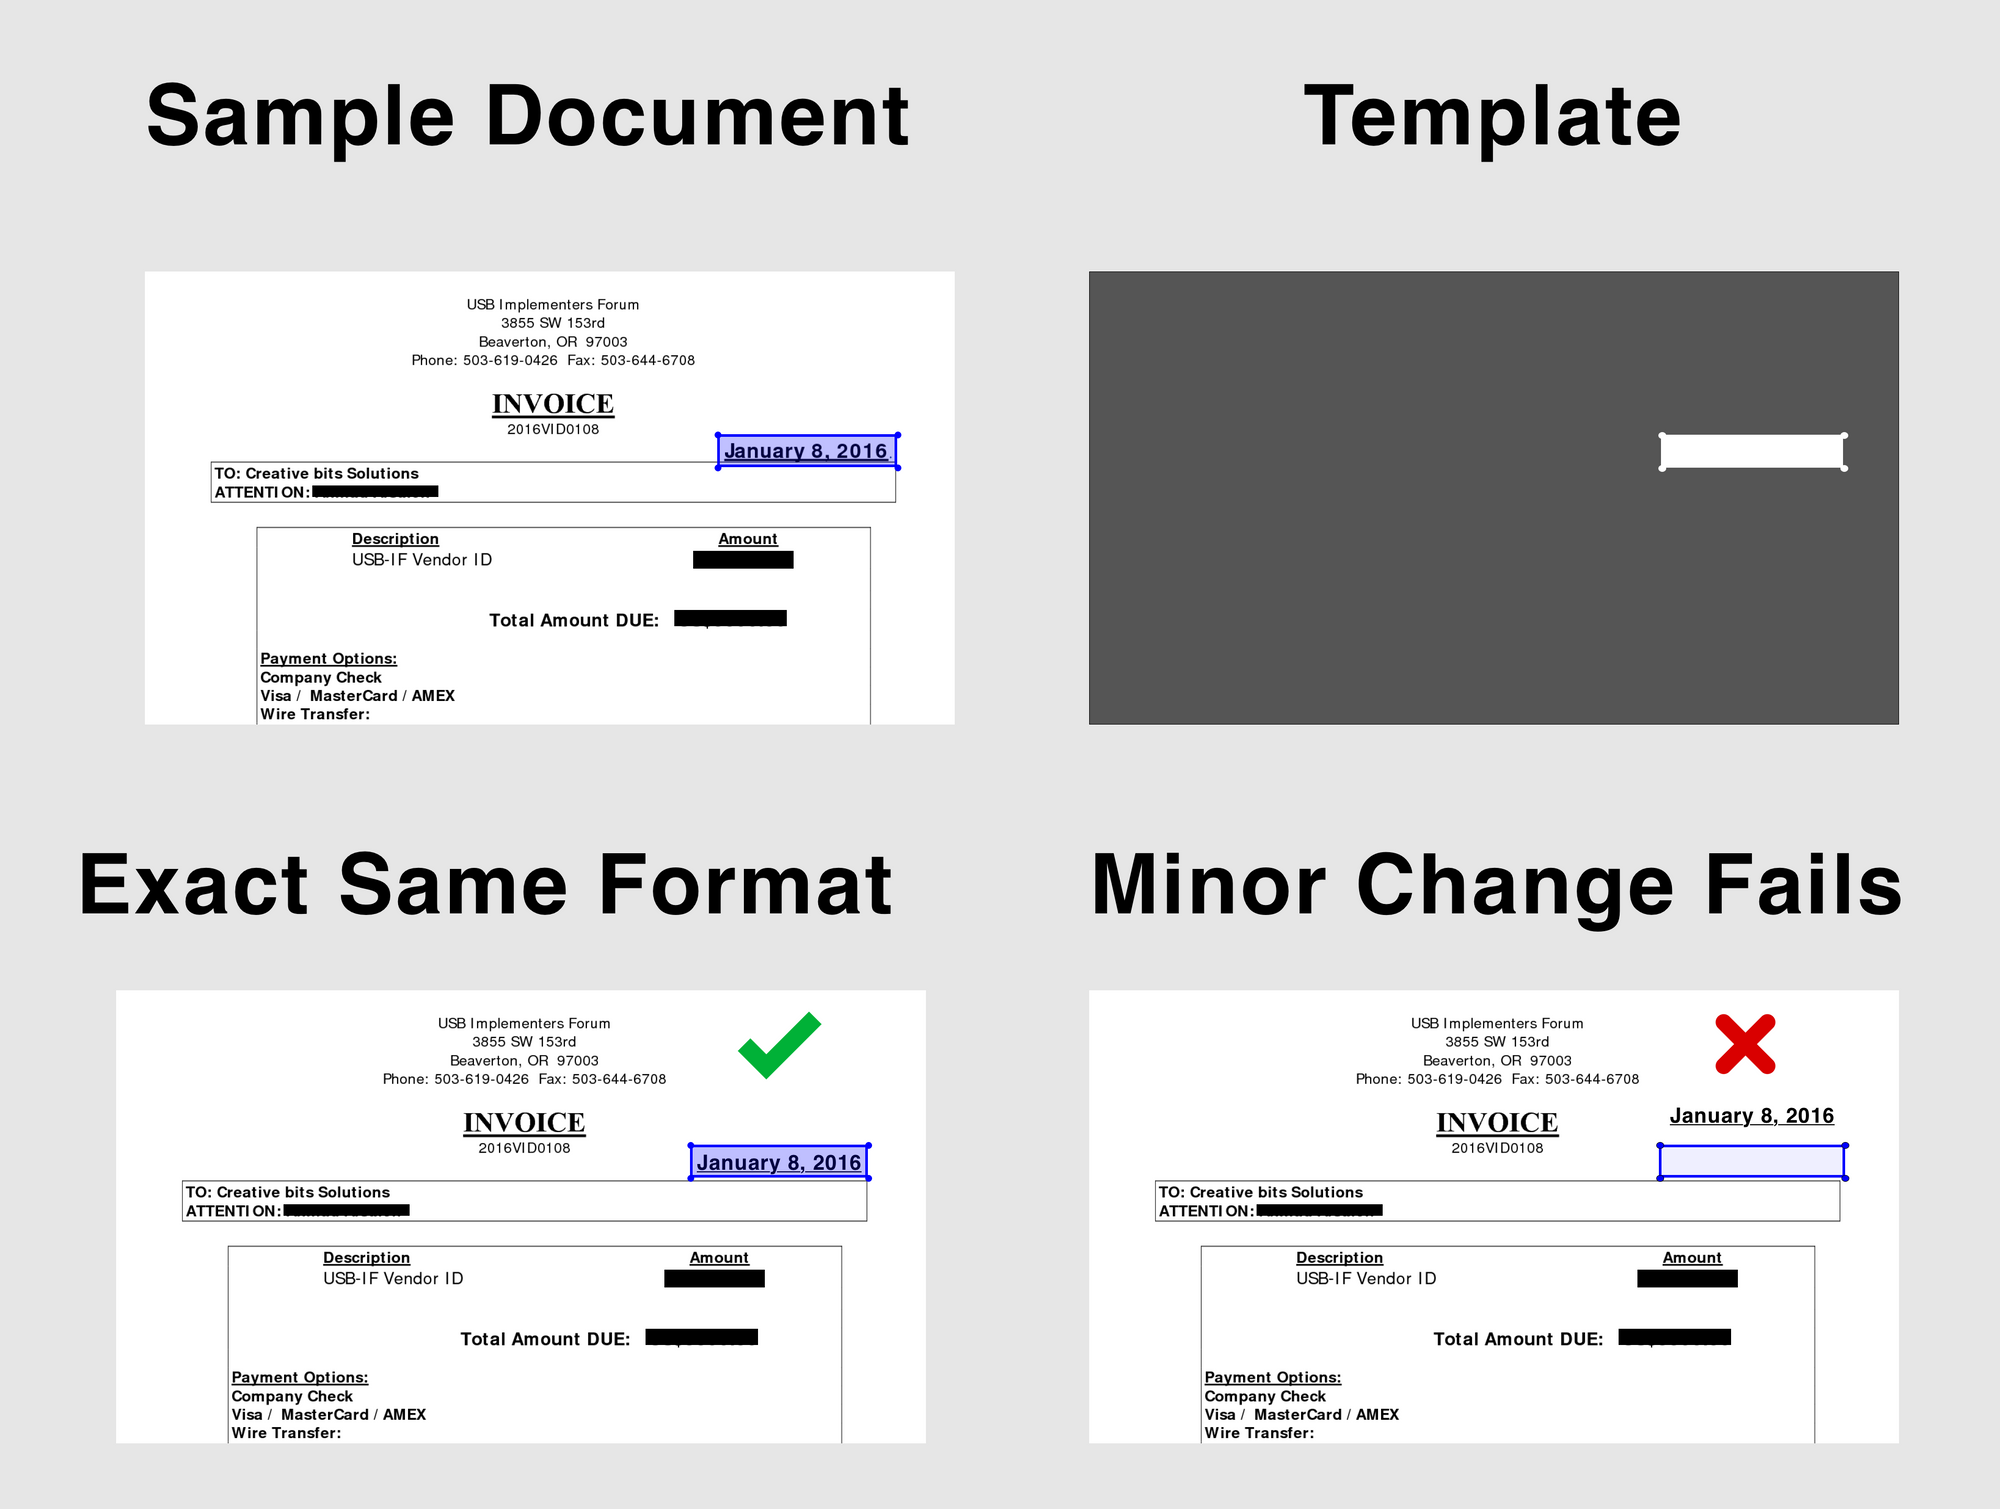 How to build an Automated Invoice Processing workflow